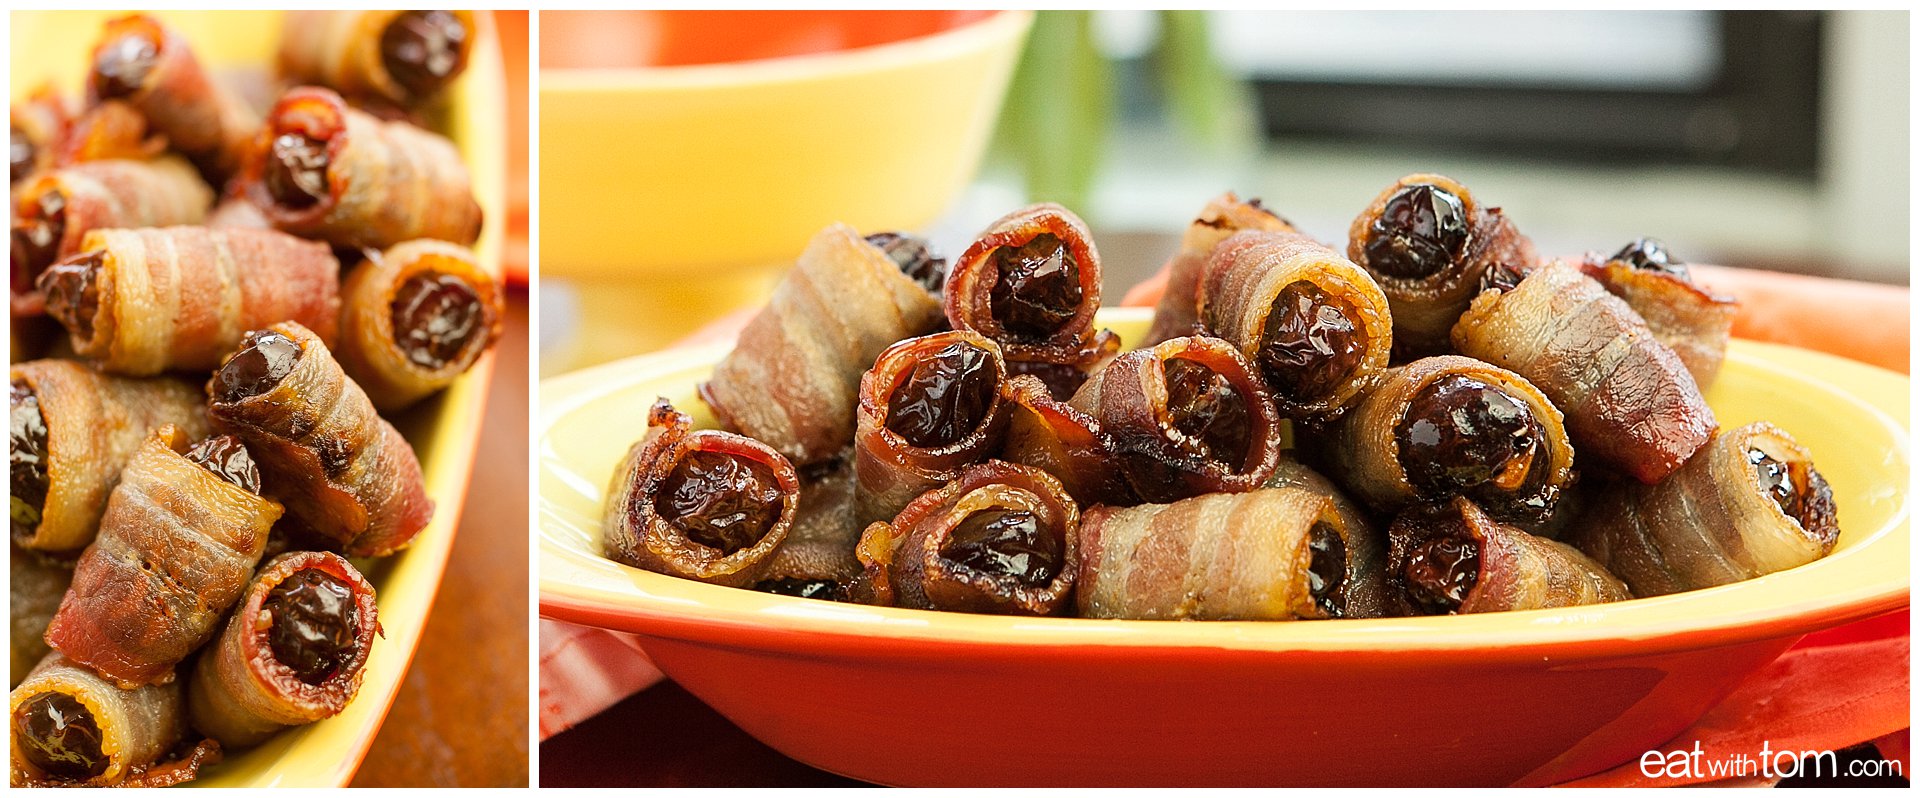 Bacon wrapped dates recipe pictures how to make healthy party food